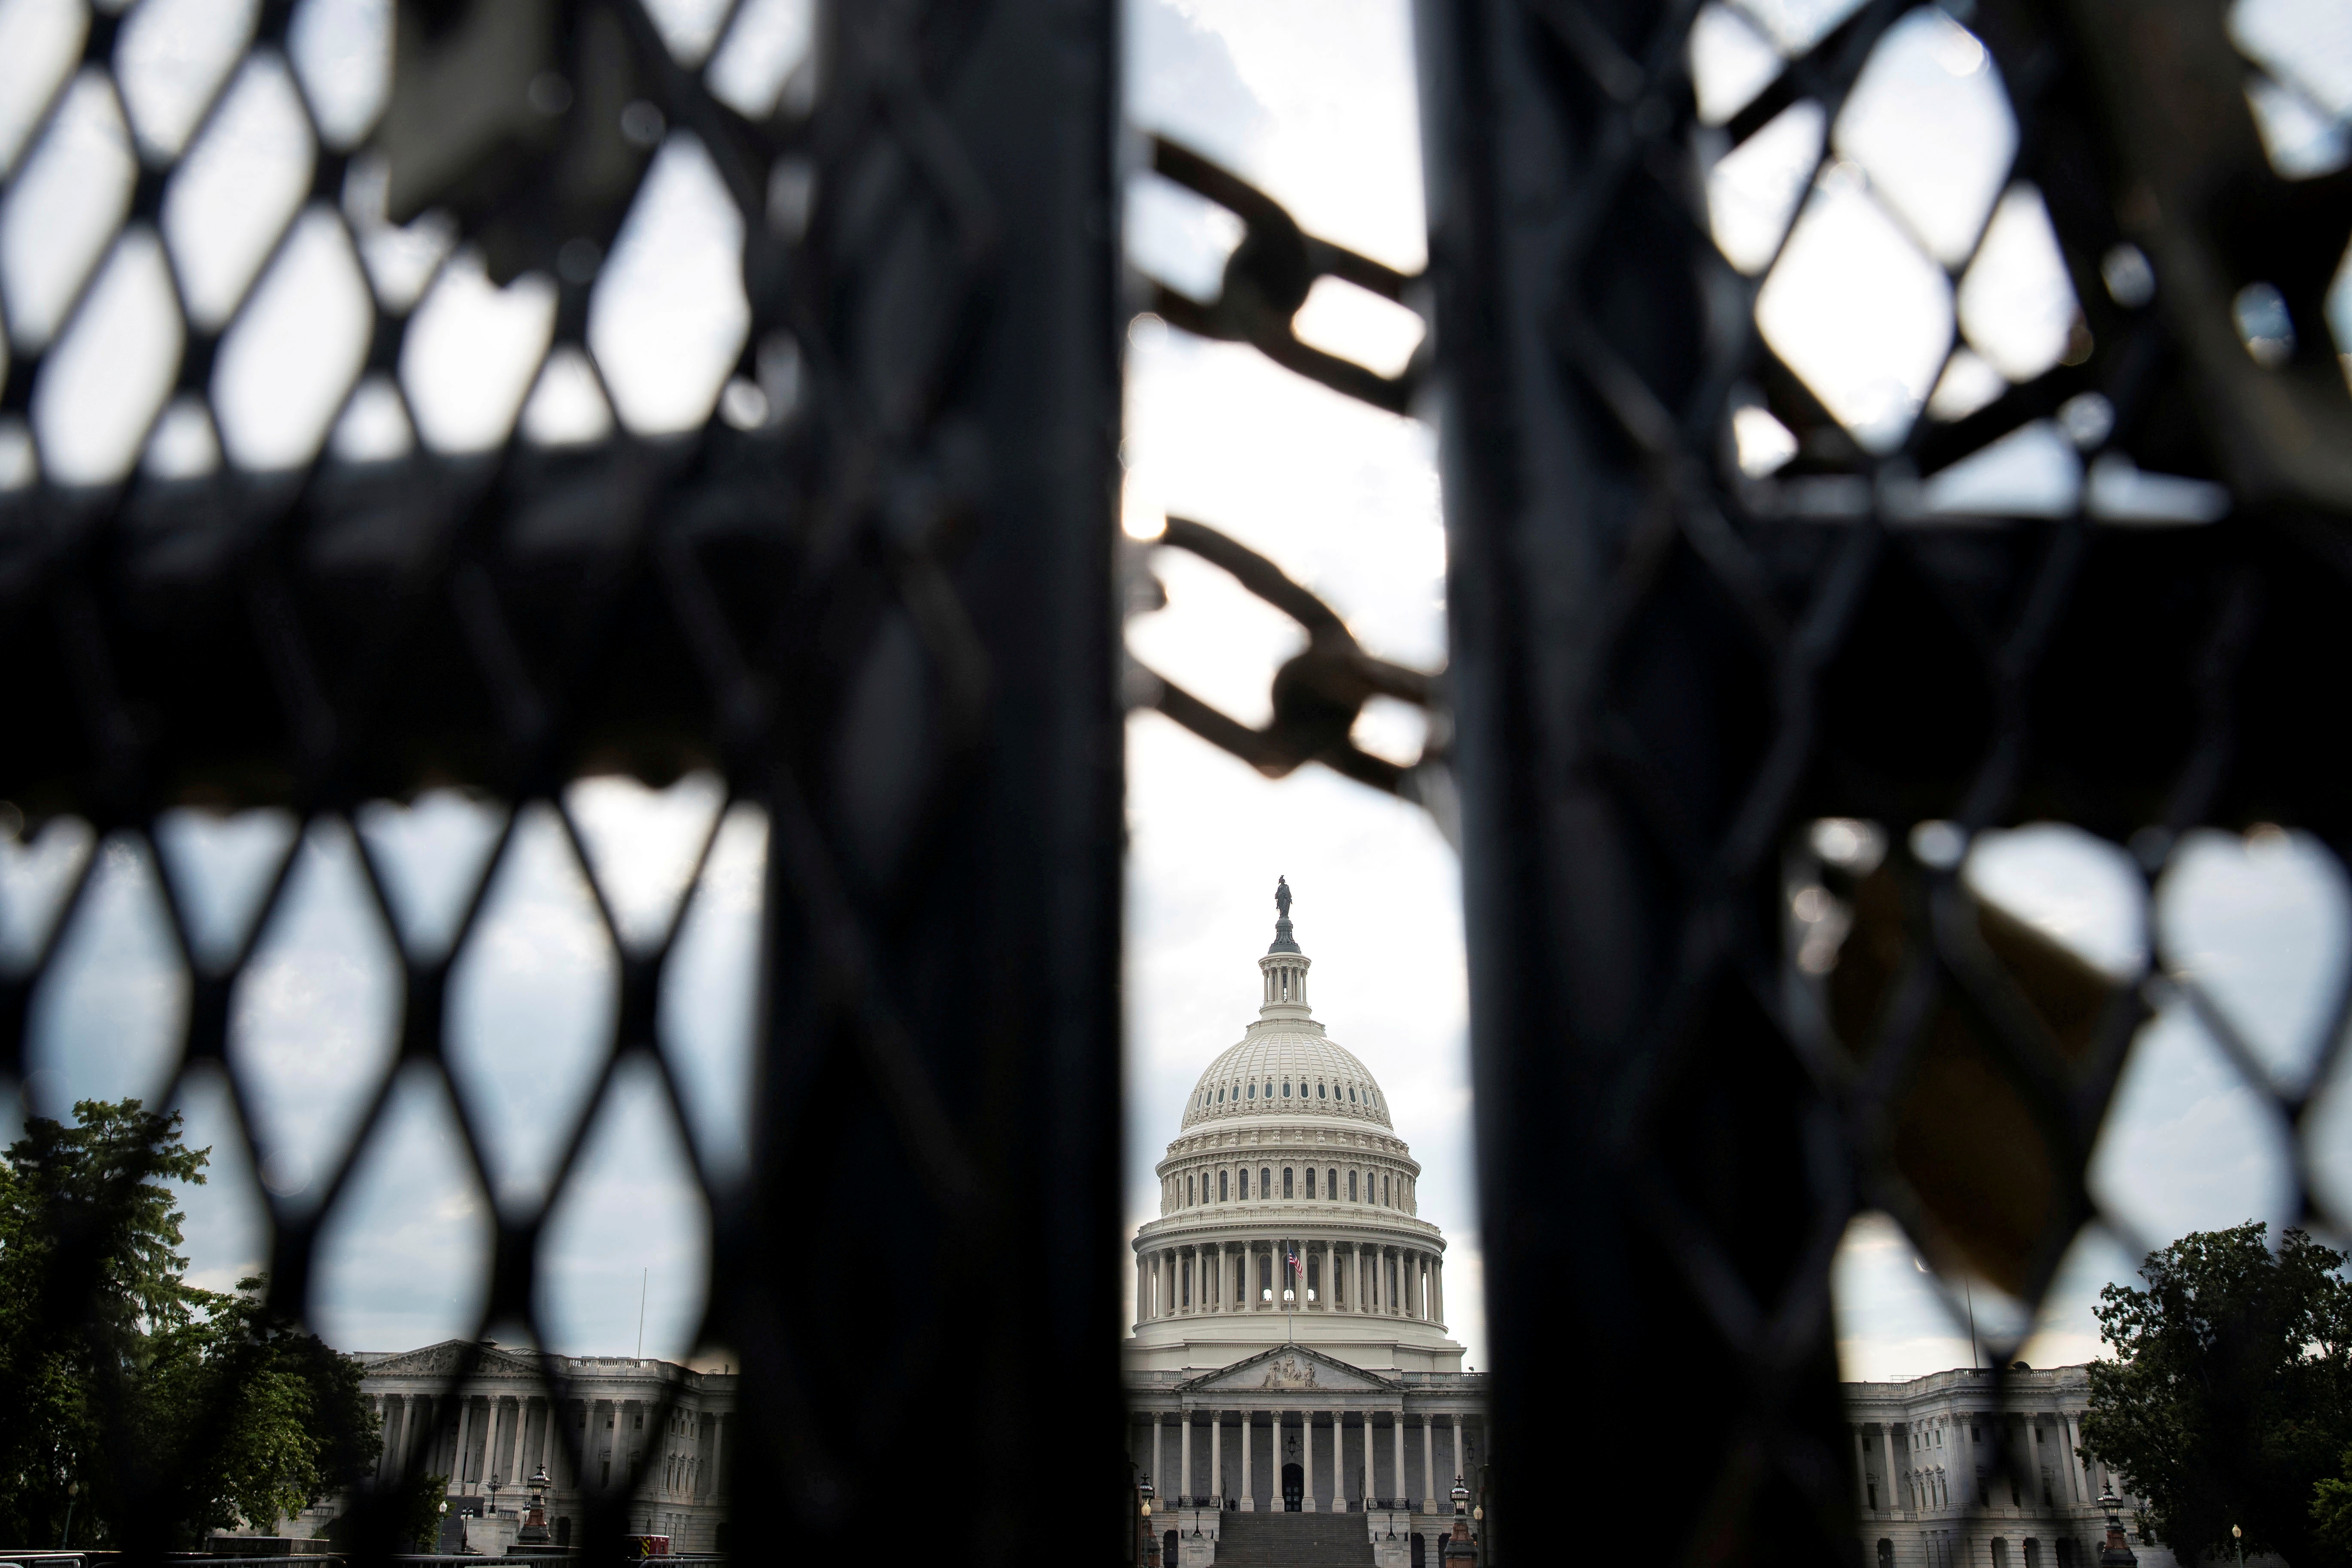 A security fence surrounds the U.S. Capitol in Washington